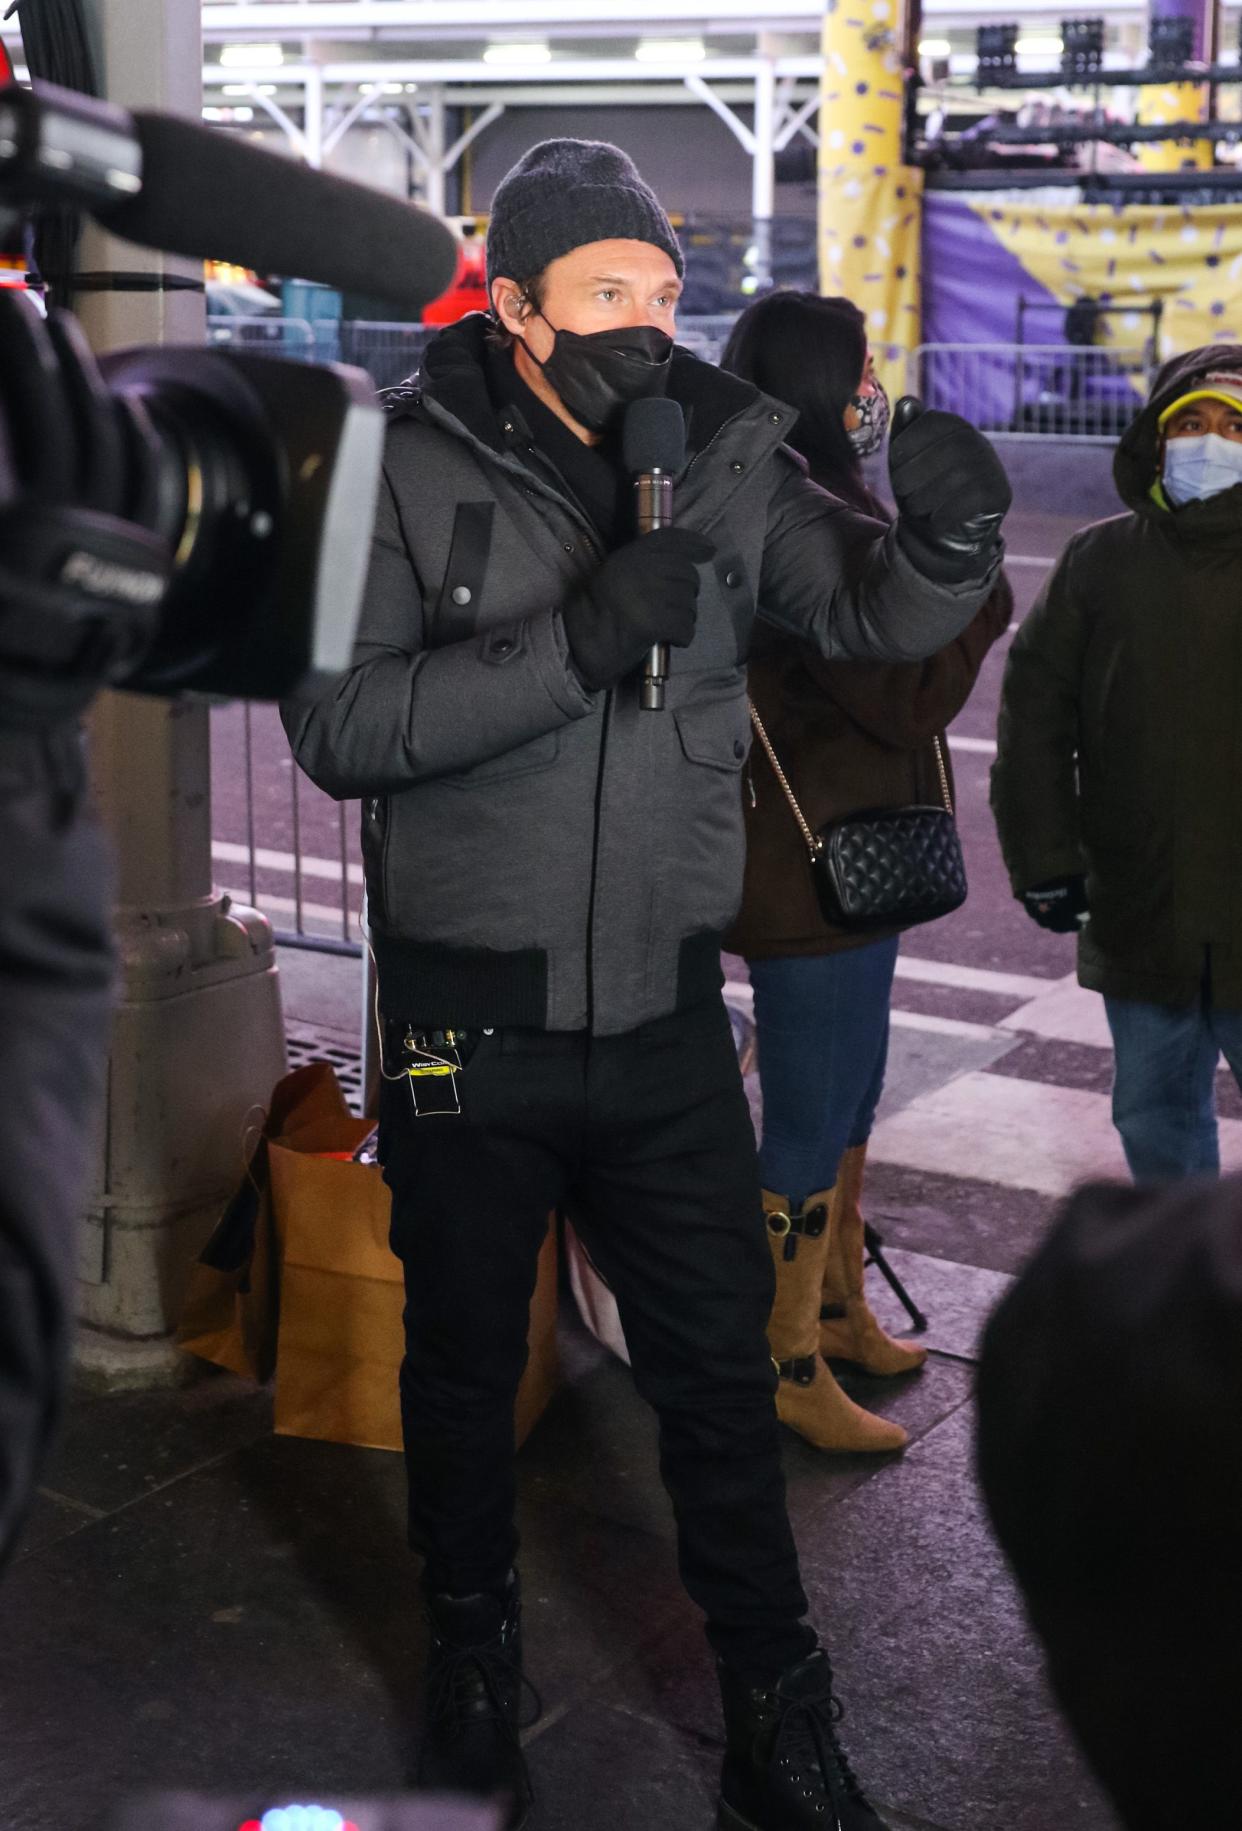 Ryan Seacrest is seen at the "Dick Clark's New Year's Rockin' Eve 2021" at Times Square on Dec. 29, 2020, in New York City.